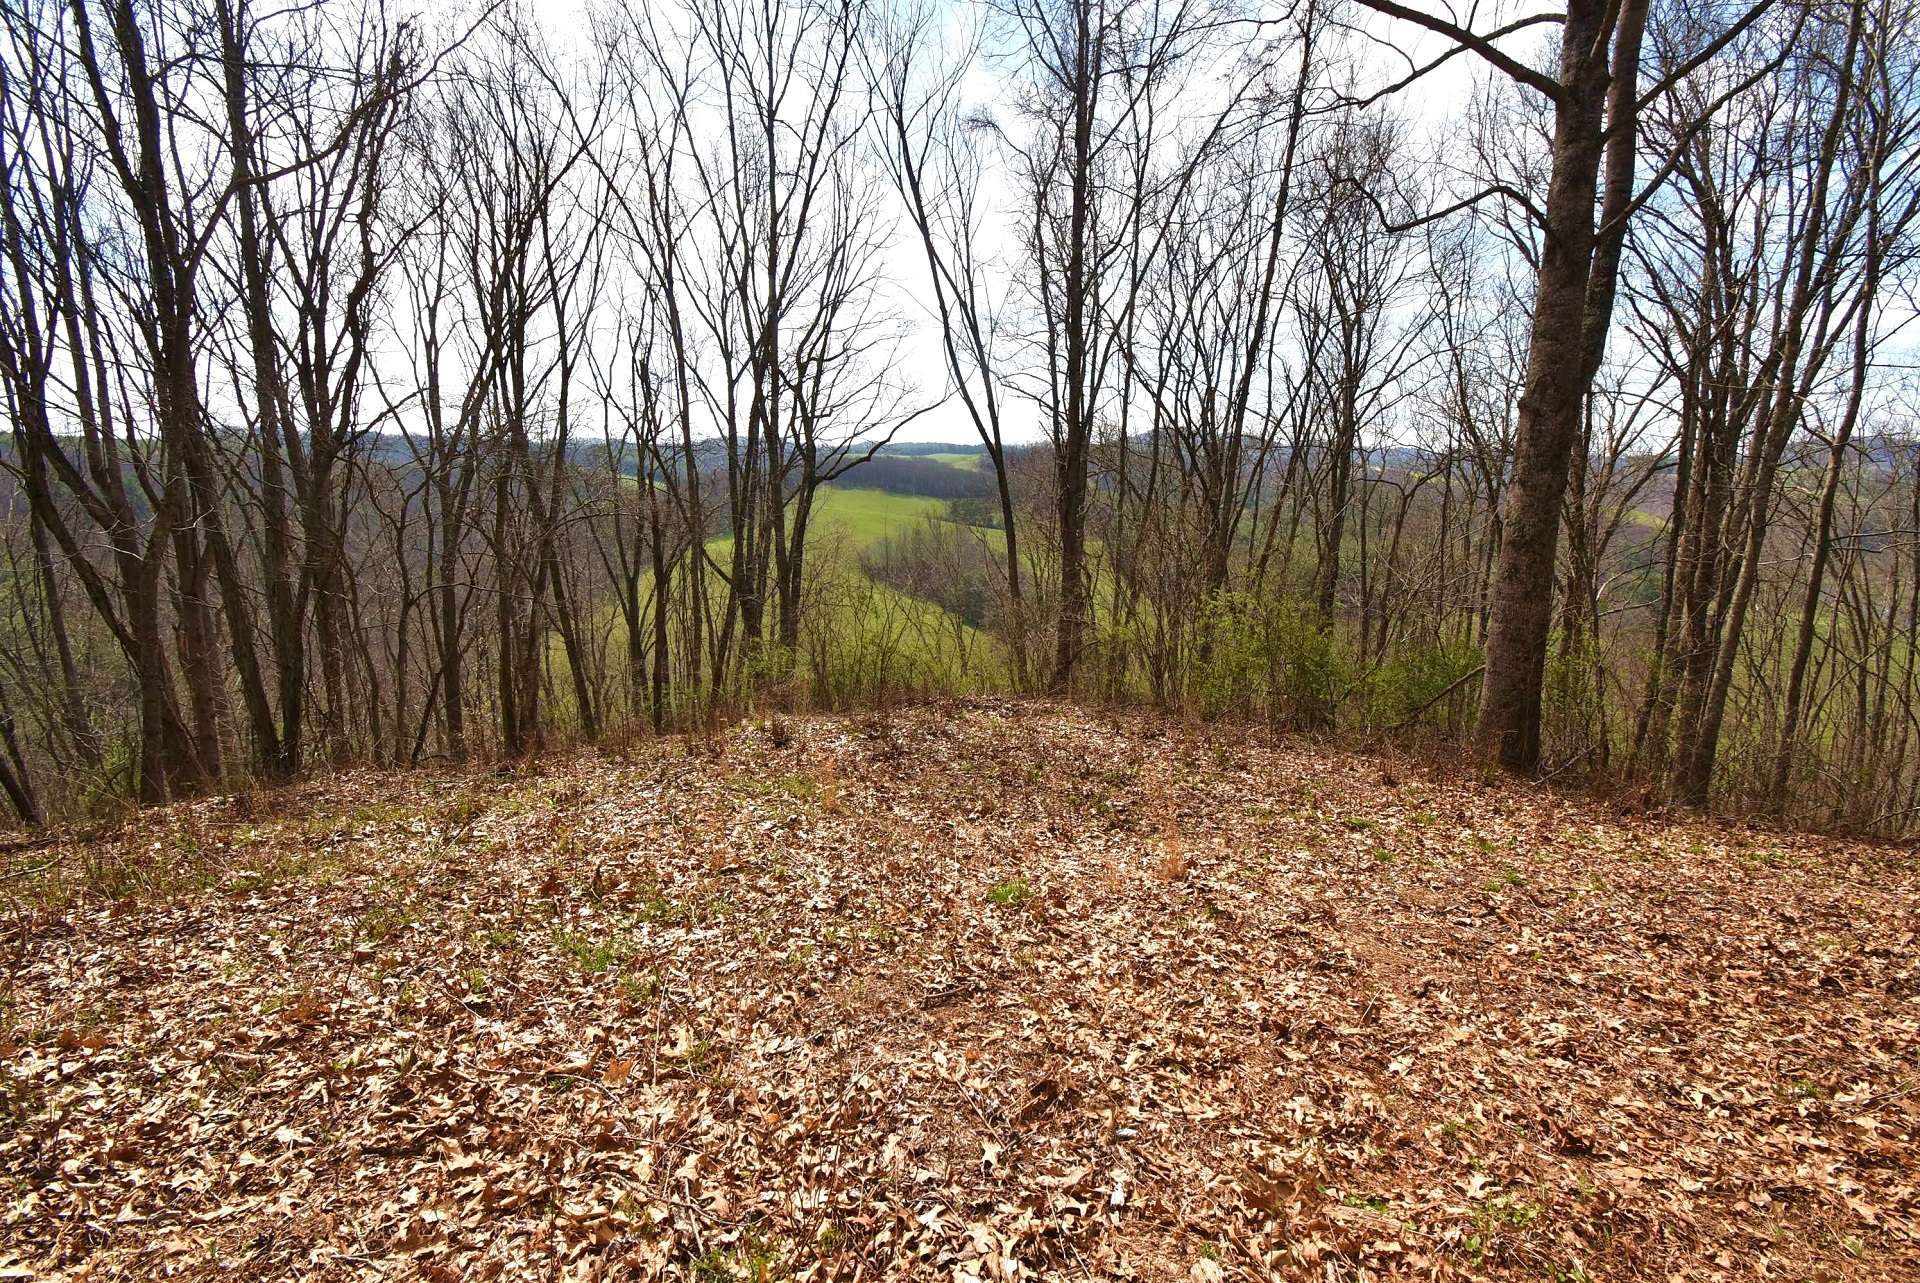 You can see the potential views with some more clearing of the upper lot. A spot for a camper or house has been cleared already. Offered at only $26,000, Lot 18 of North River Estates is the ideal spot for your RV, Camper, or NC Mountain Retreat. A222 *Broker Interest!